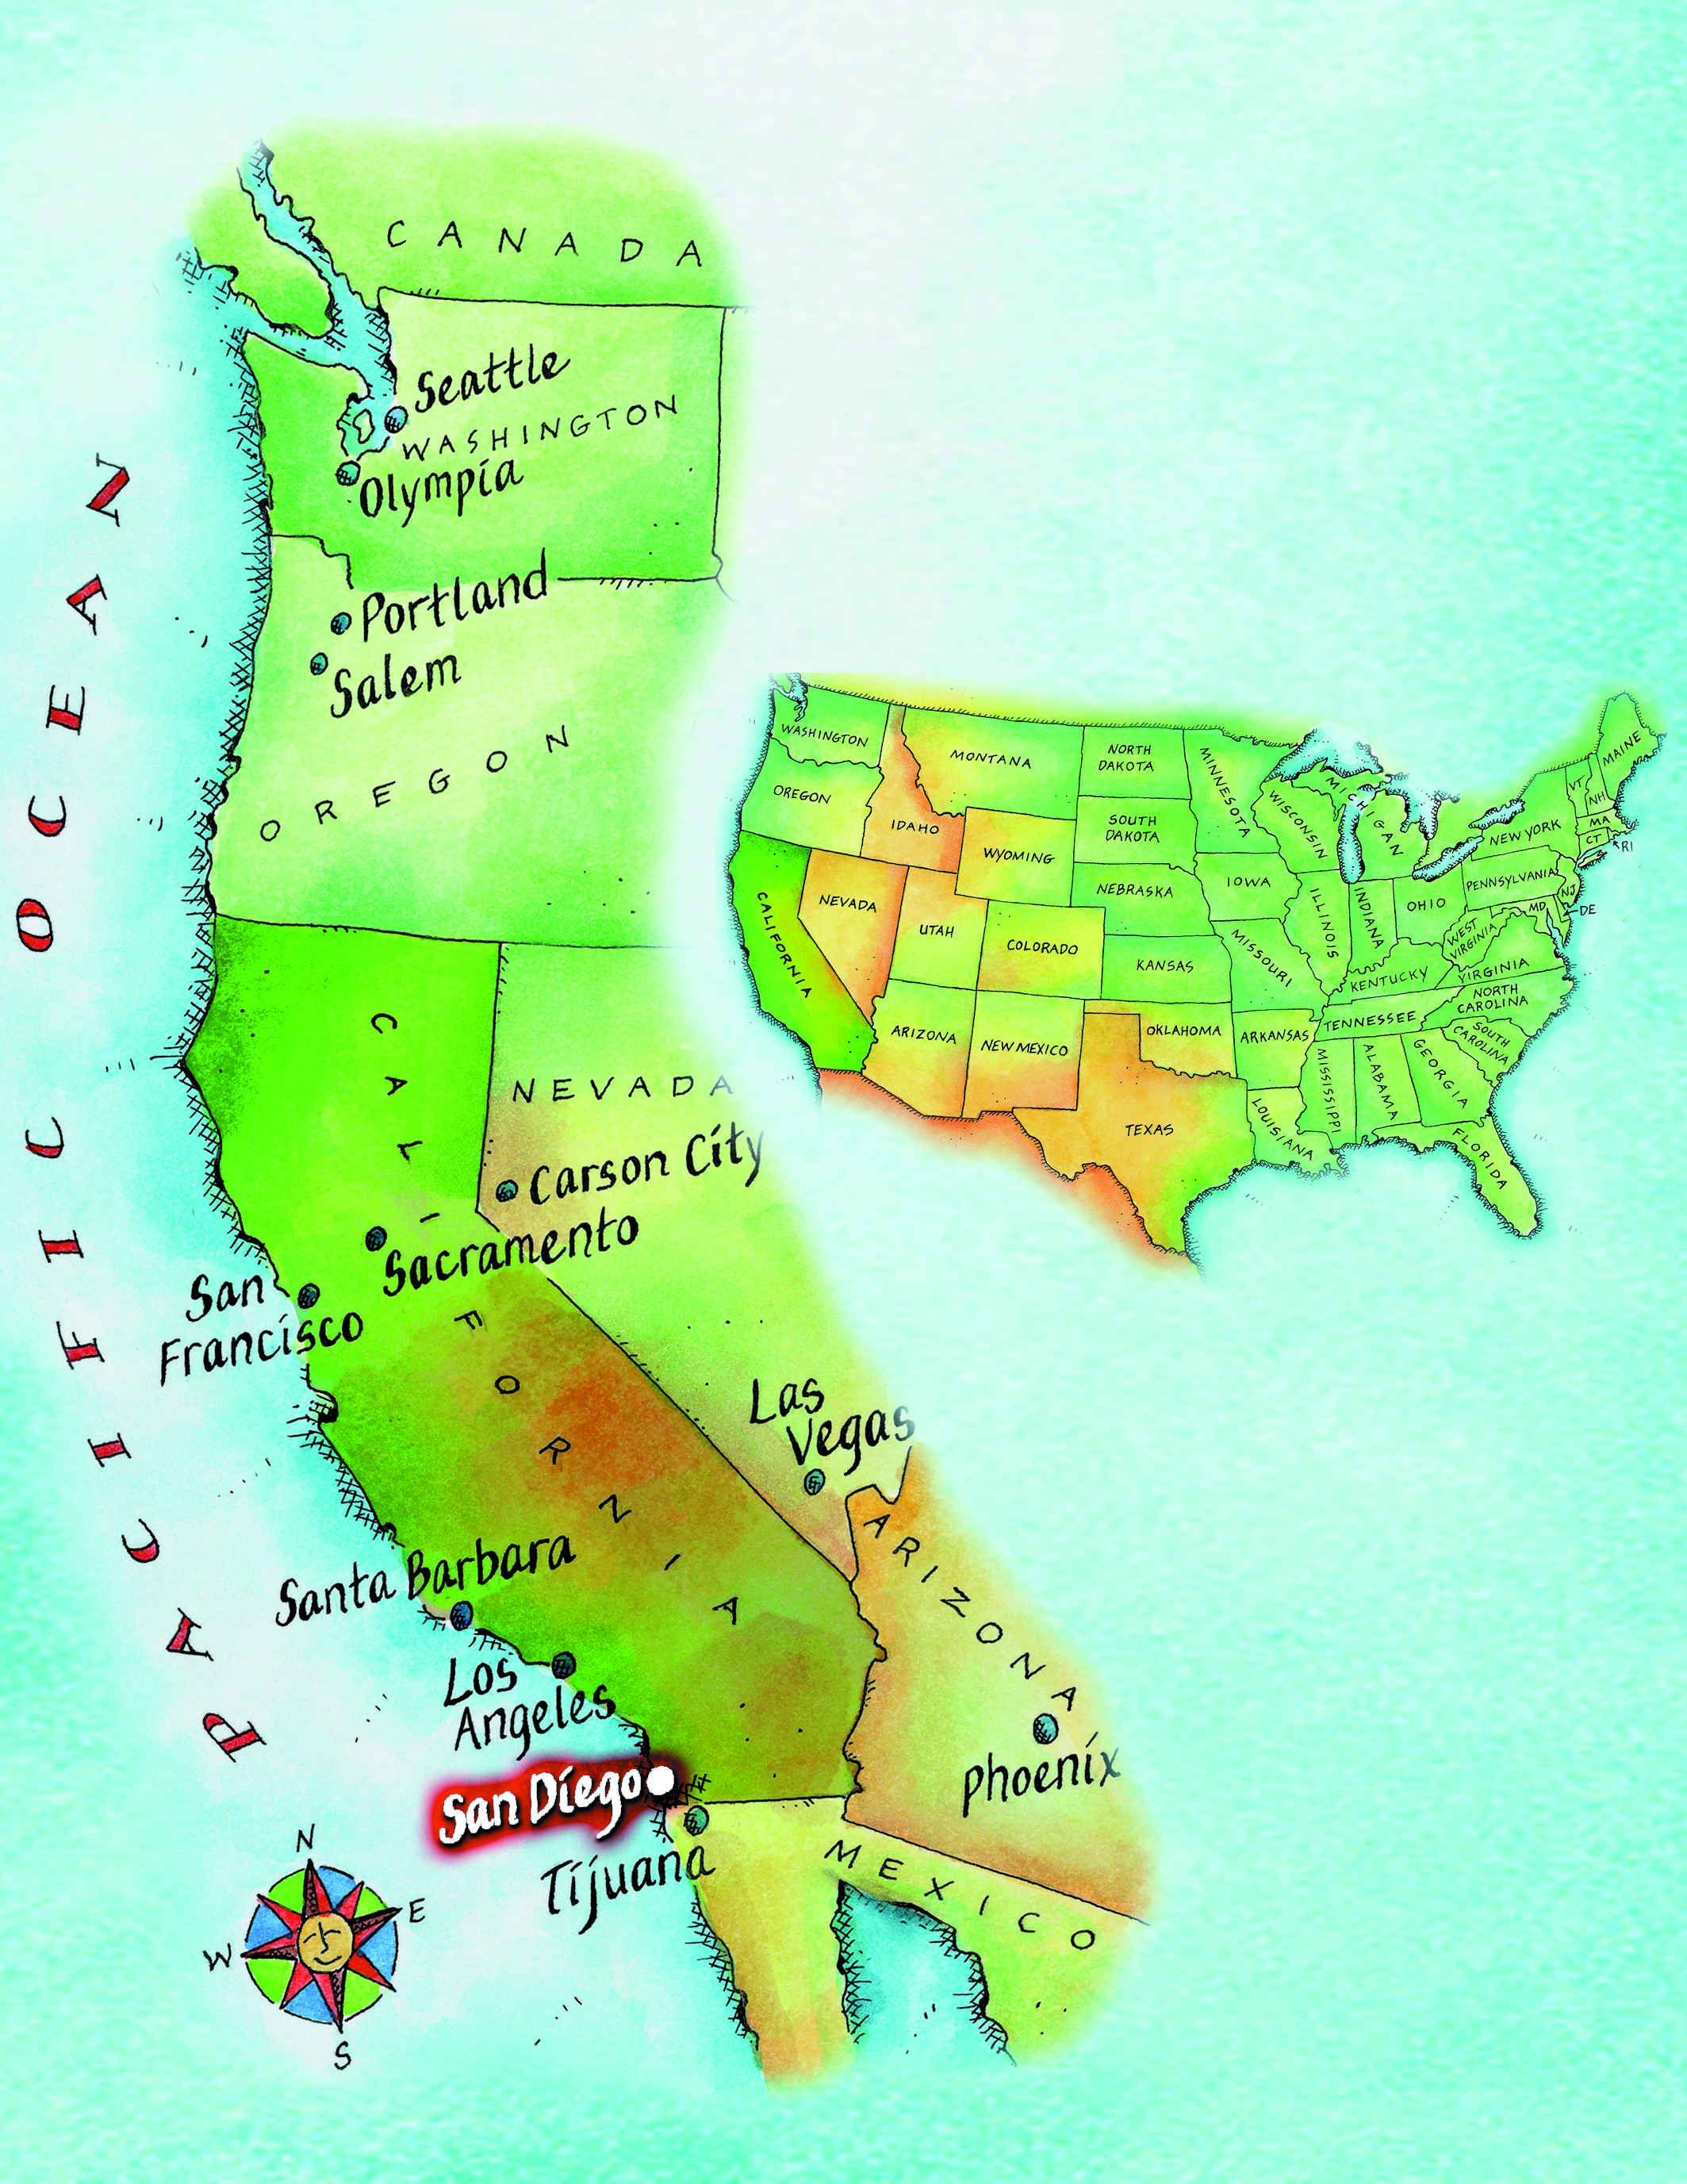 Us Map Hd Map Of San Diego On Map Of California - Klipy - San Diego On A Map Of California